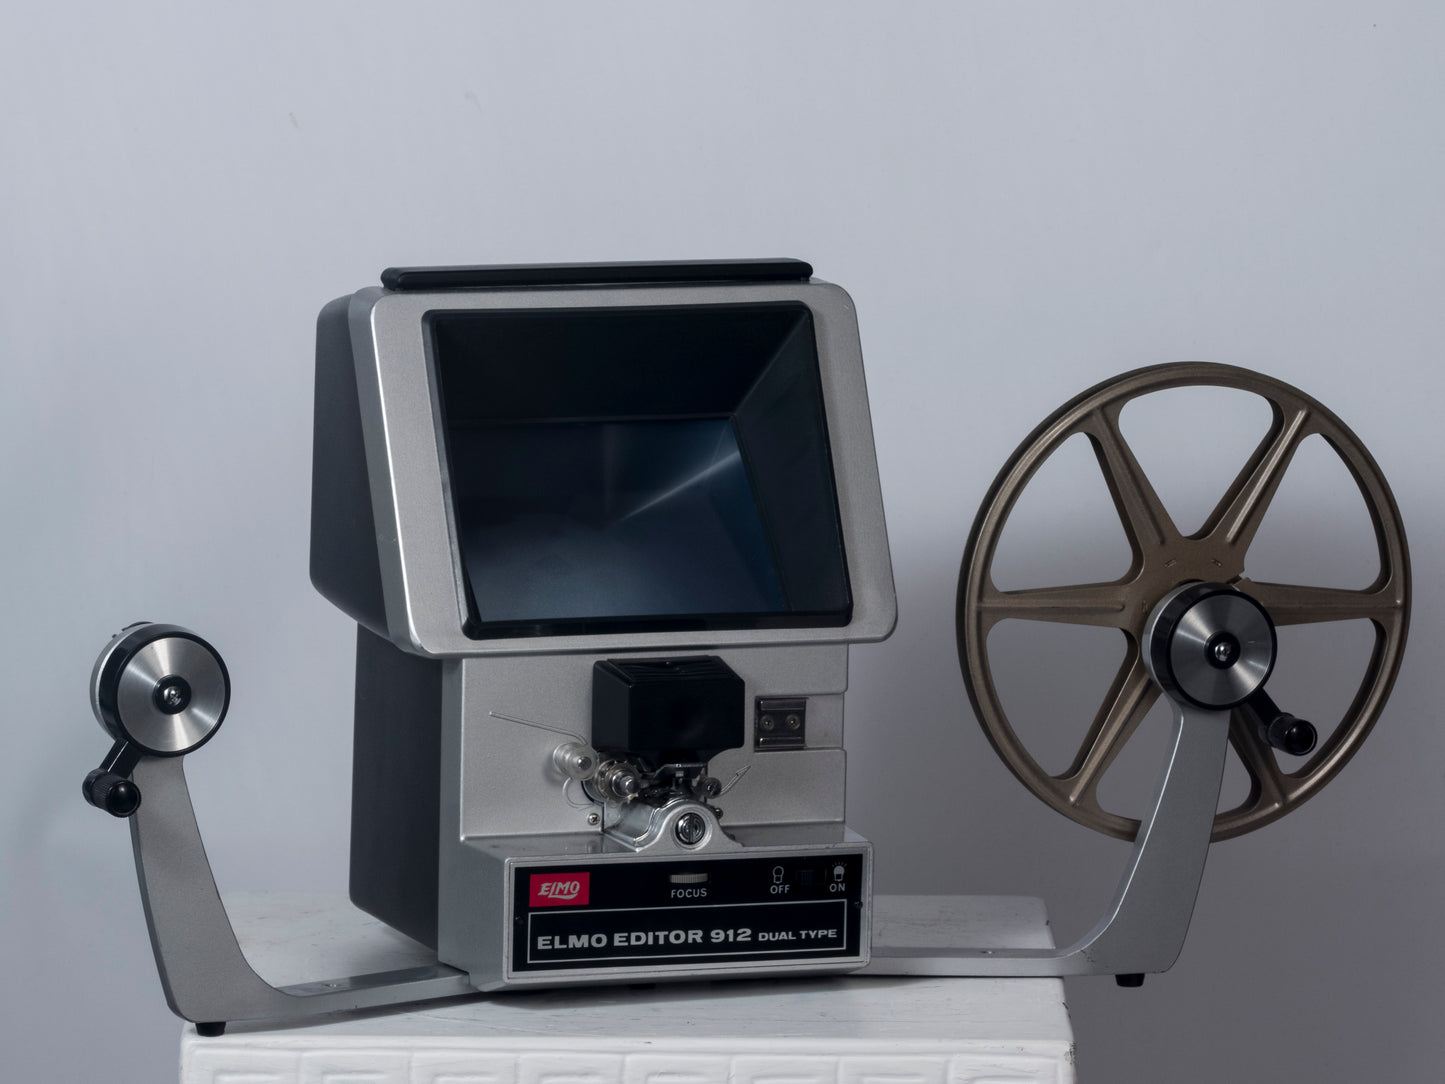 Elmo Editor 912 Dual Type Super 8 and 8mm viewer/editor